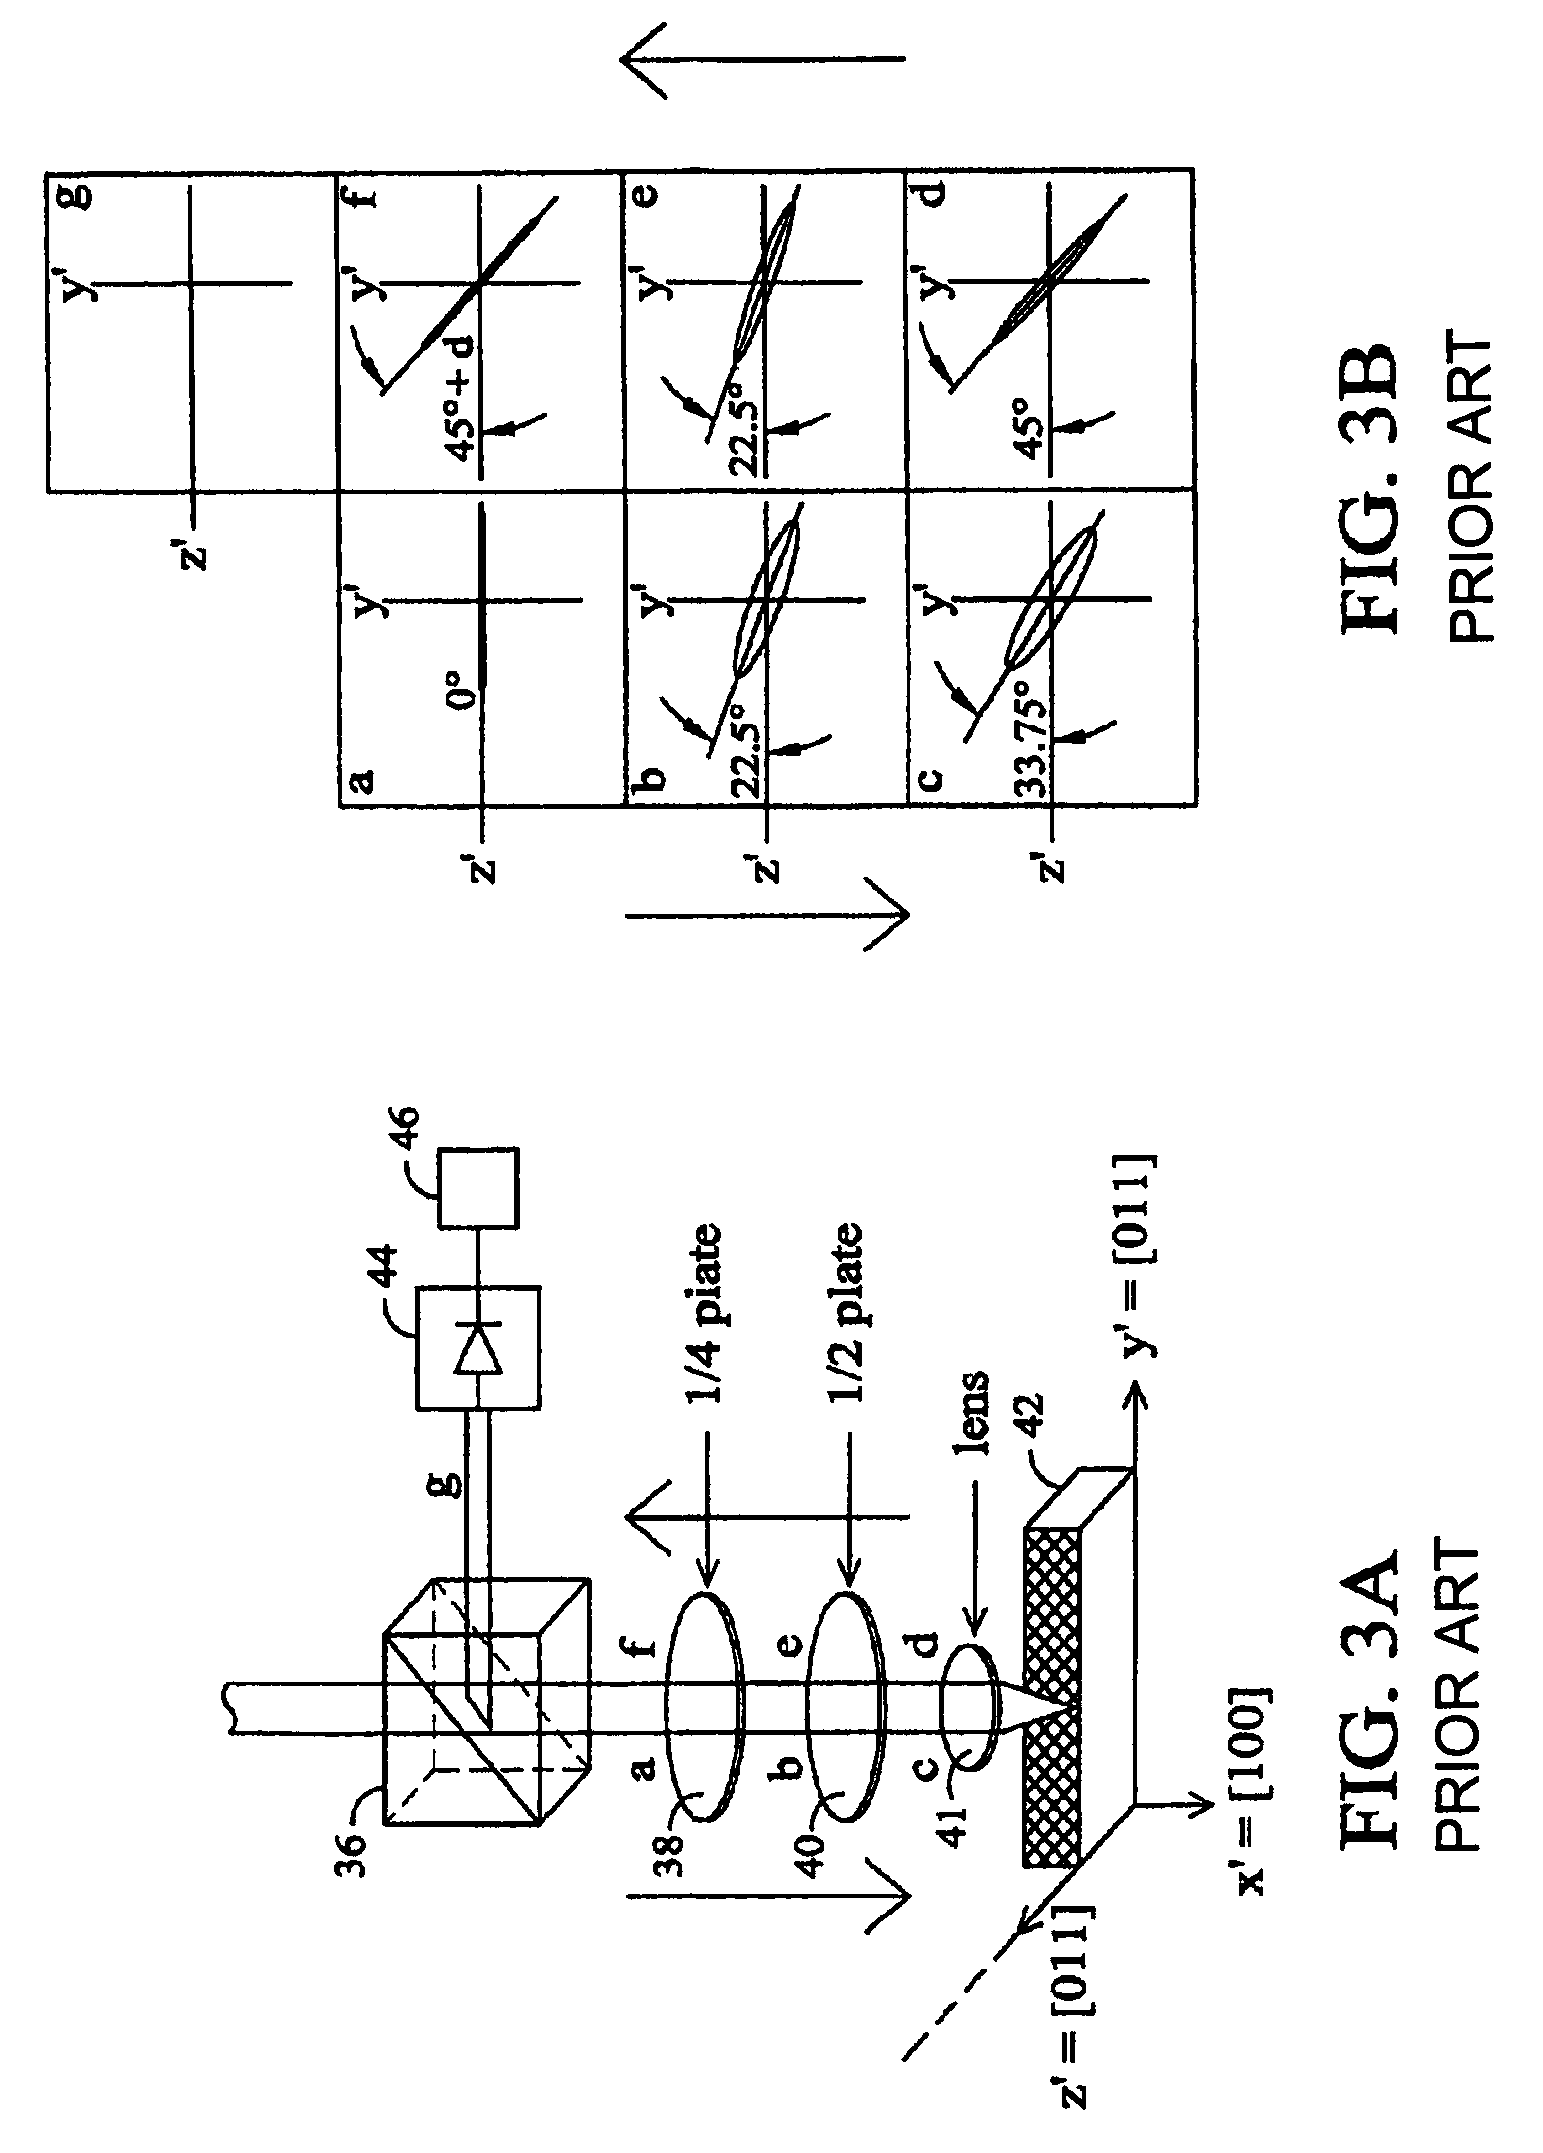 Method for optically testing semiconductor devices